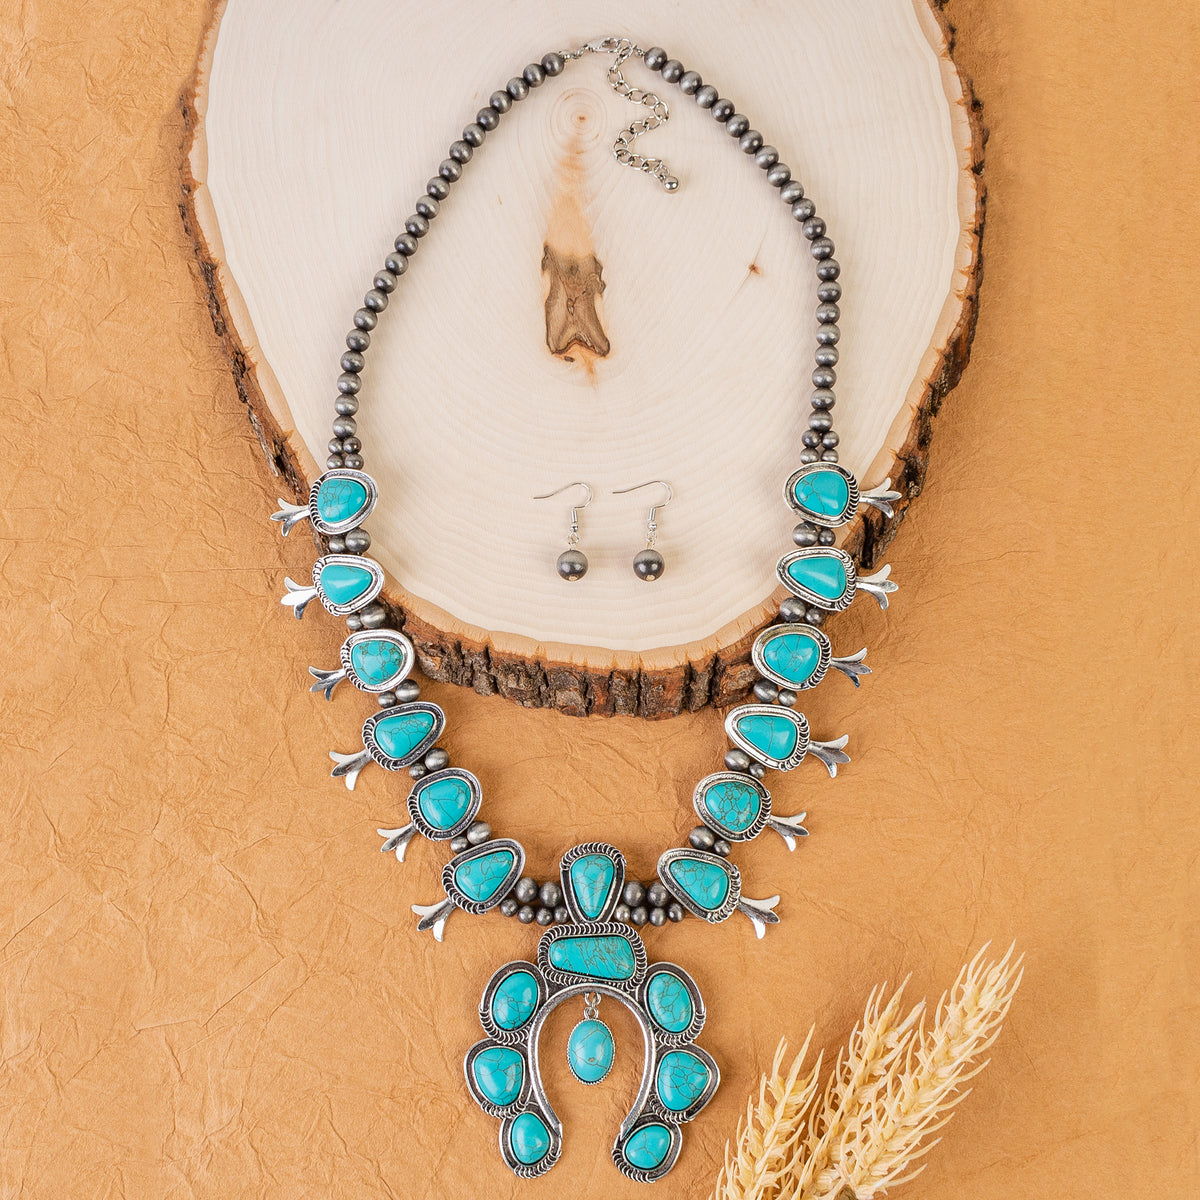 72833 - Squash Blossom Necklace - Turquoise & Silver